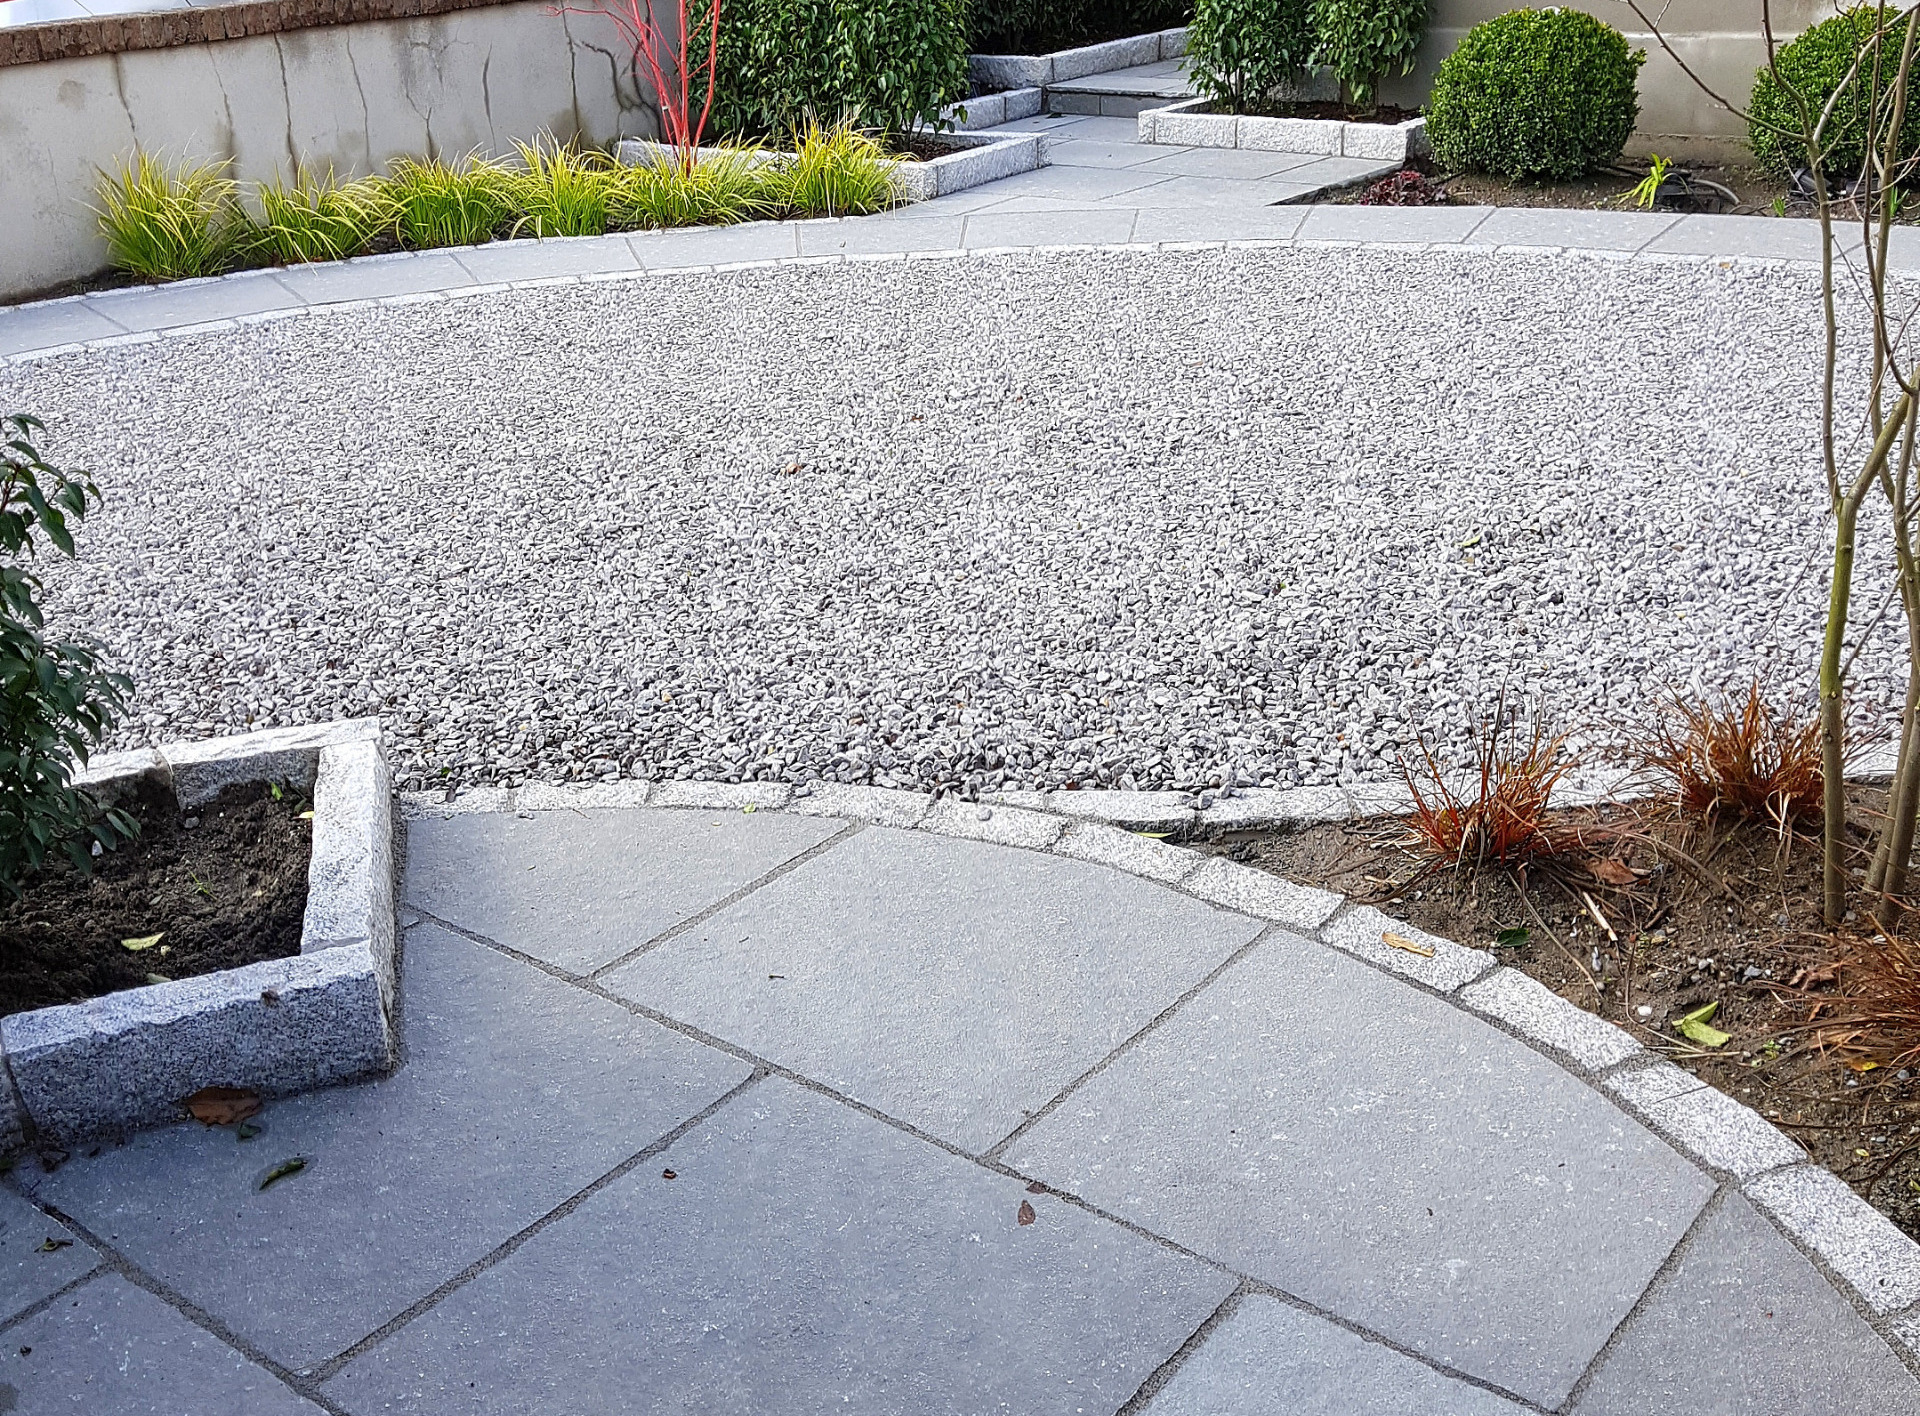 Natural Stone & Loose stone chippings Driveway Design | Churchtown, Dublin 14